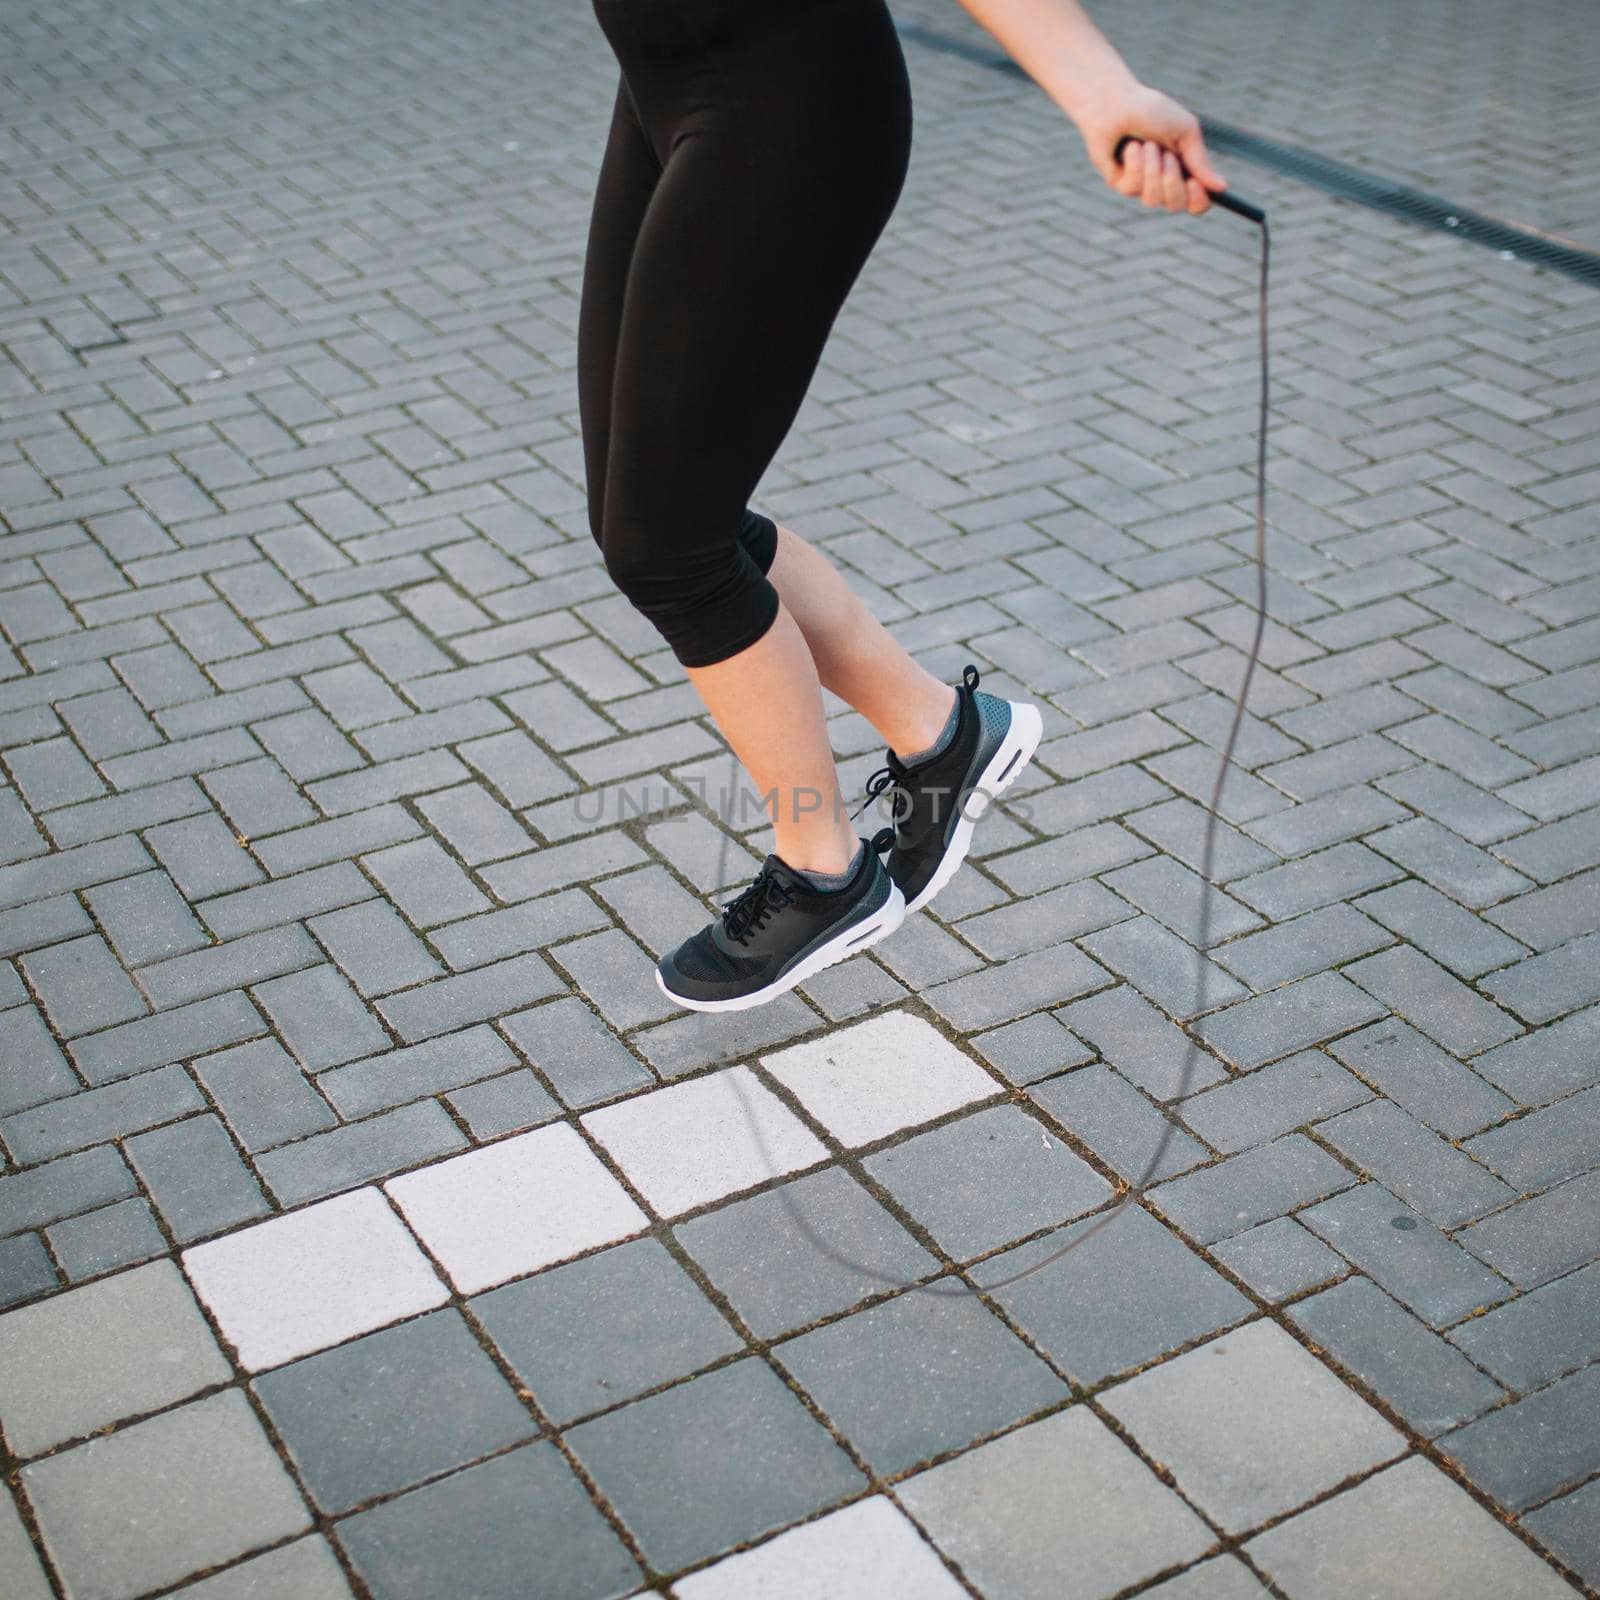 crop woman jumping with rope street. High quality photo by Zahard